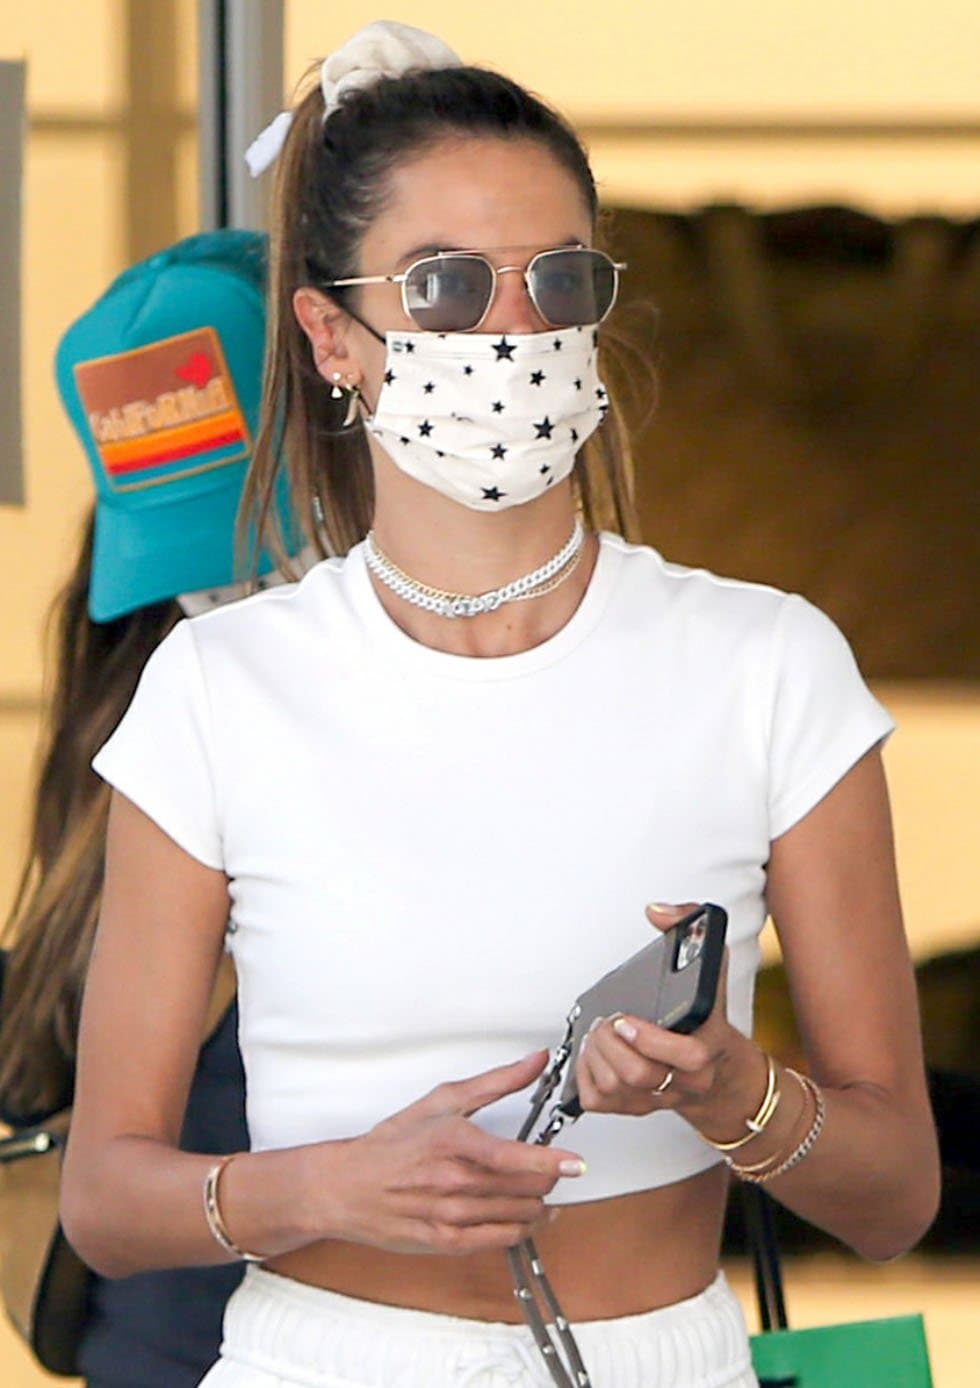 Alessandra Ambrosio looks chic with a high ponytail tied with a scrunchie, layered necklaces, and a star-patterned face mask